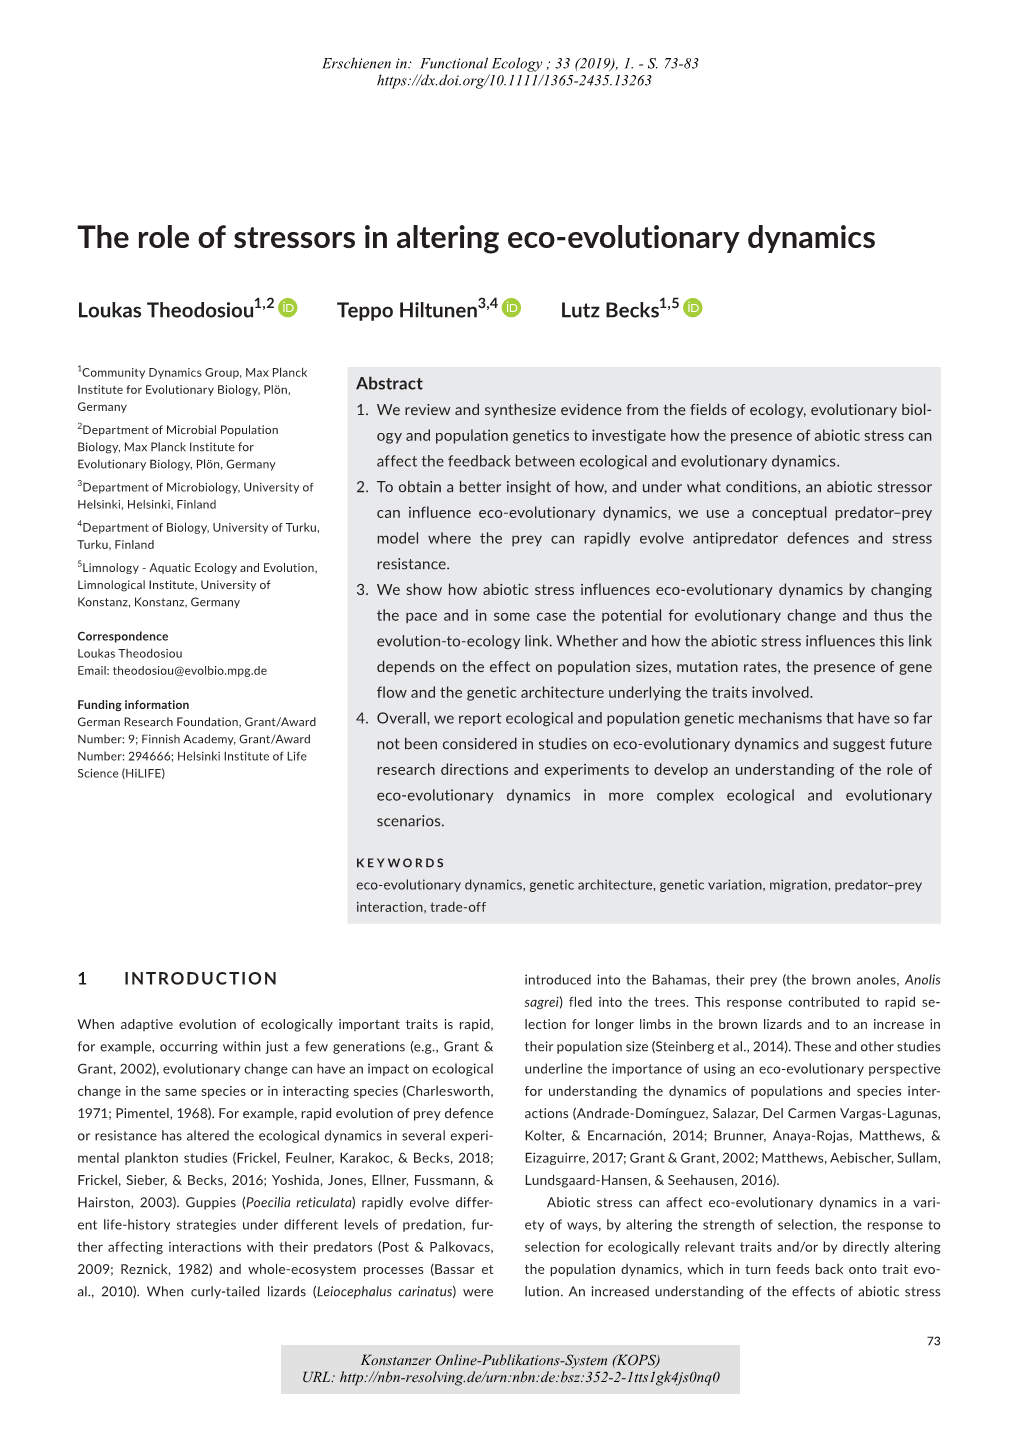 The Role of Stressors in Altering Eco‐Evolutionary Dynamics